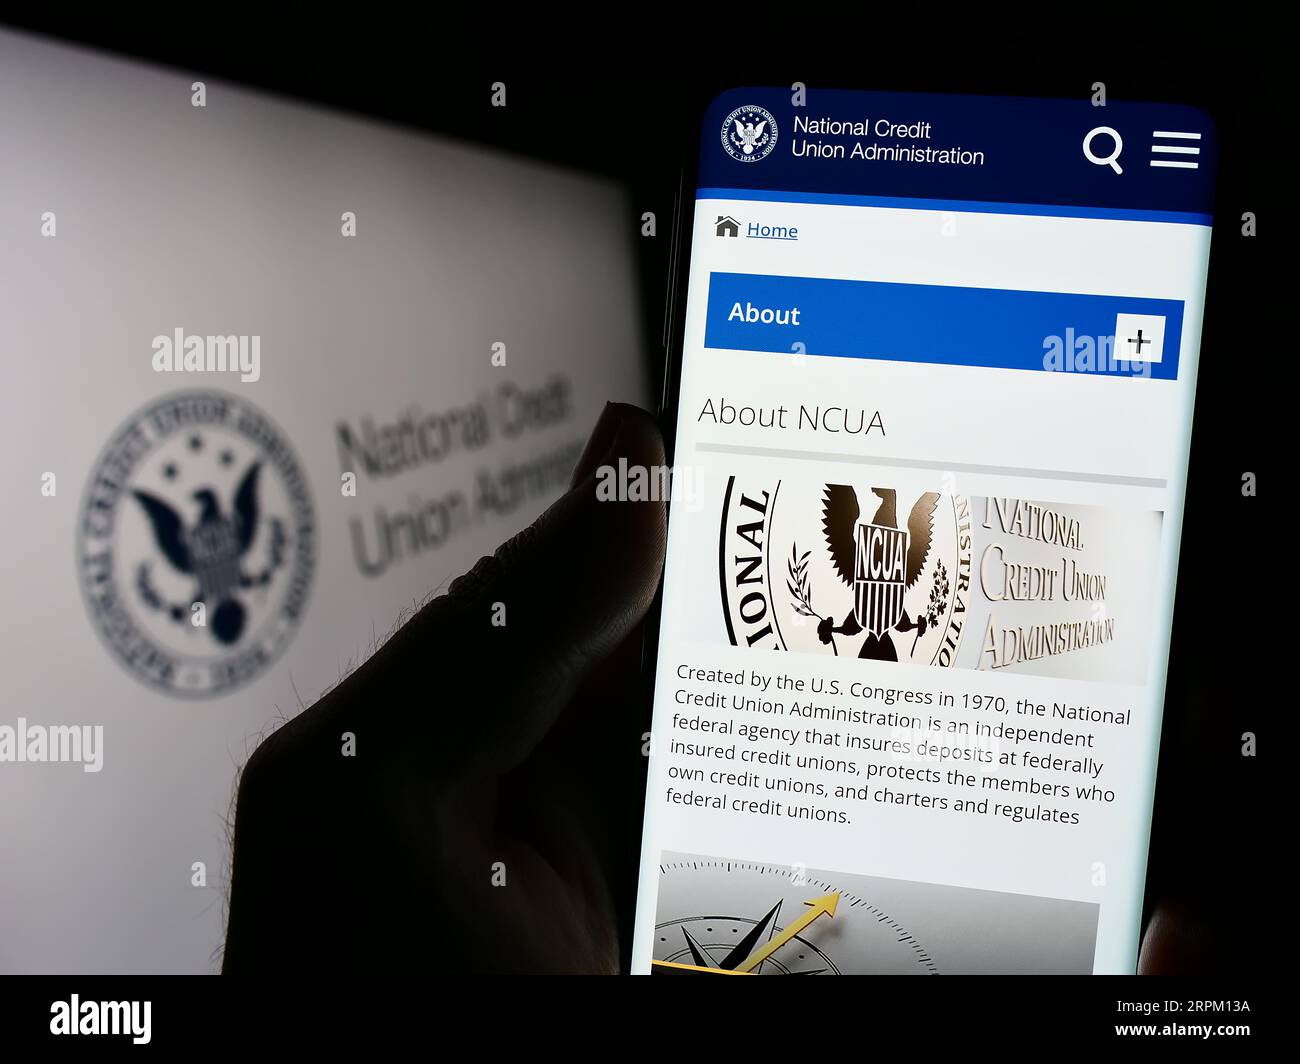 Person holding cellphone with website of National Credit Union Administration (NCUA) on screen in front of seal. Focus on center of phone display. Stock Photo